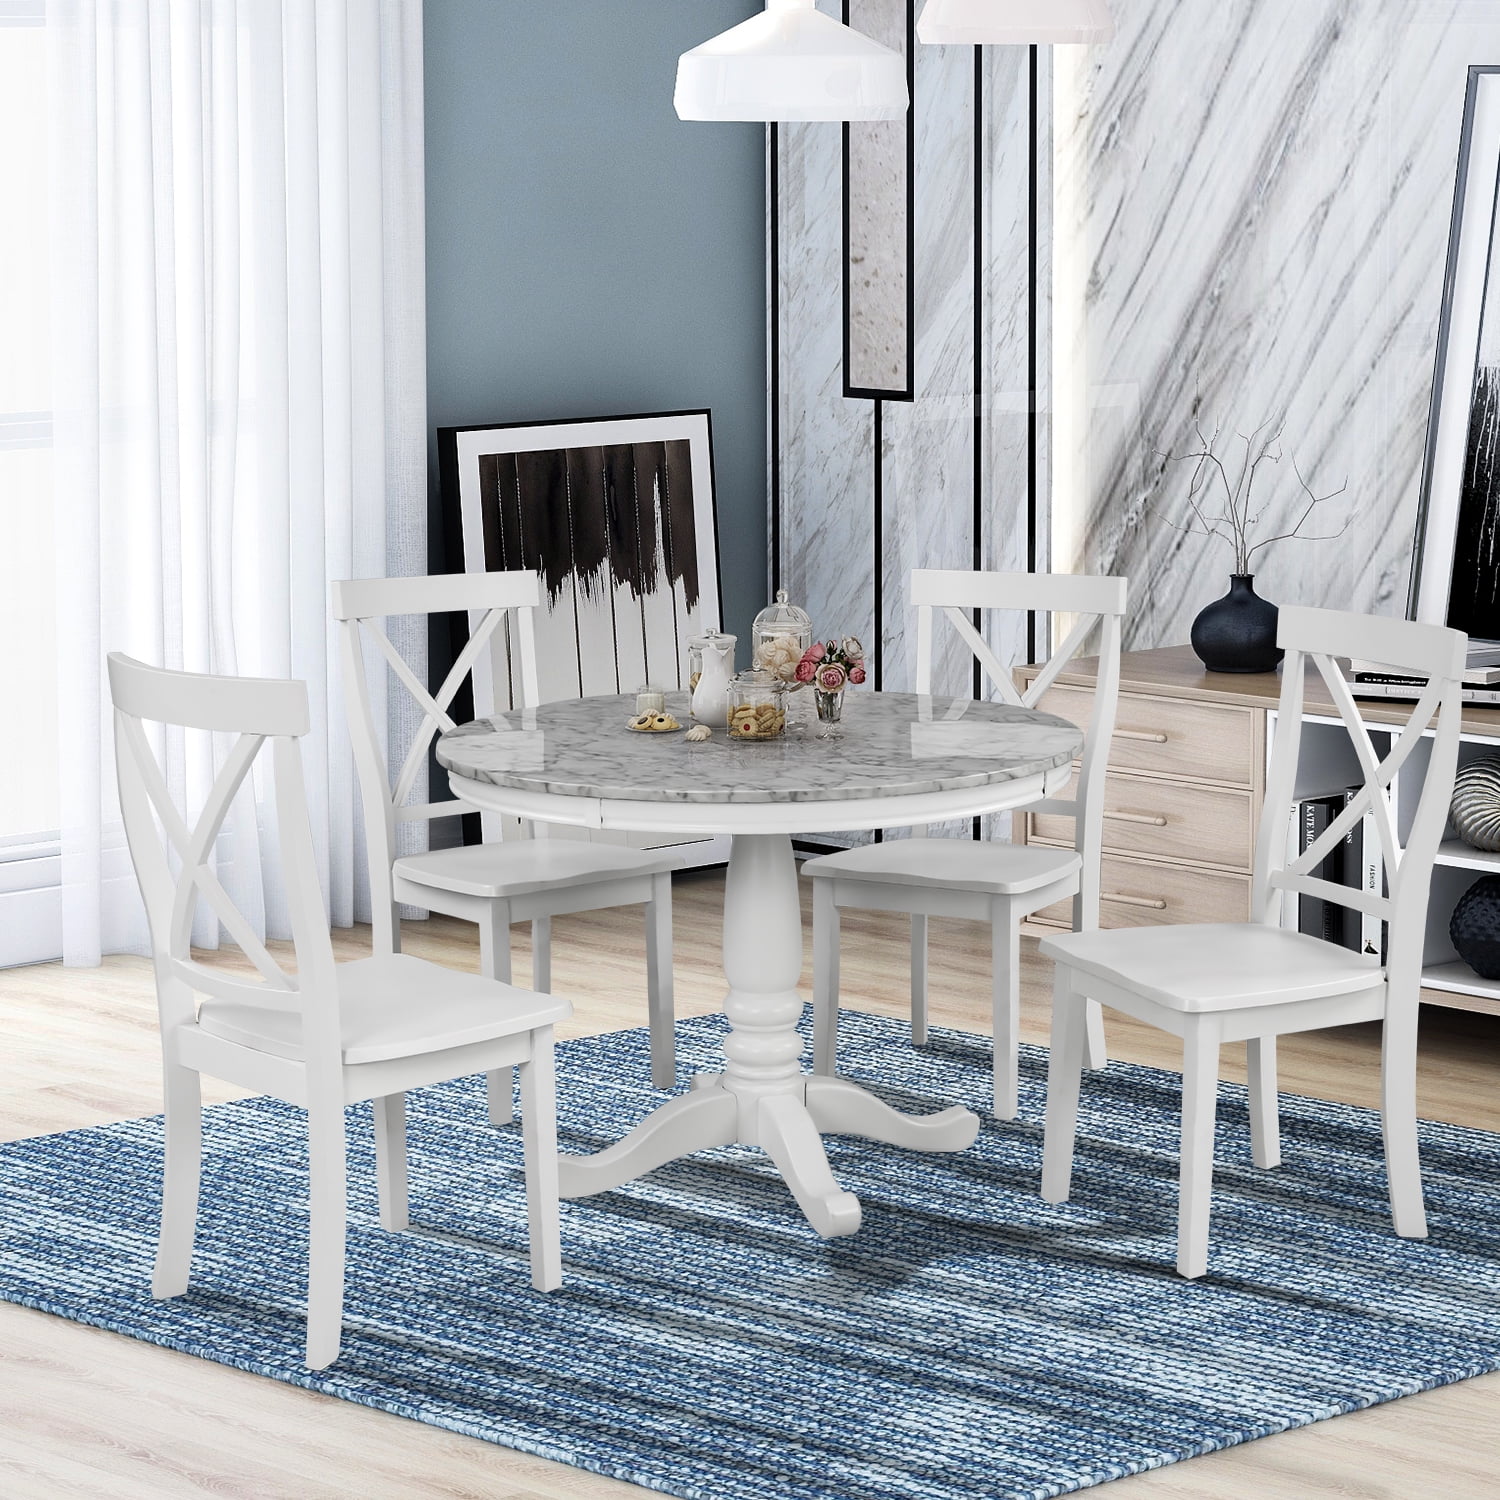 Breakfast Nook Dining Table Chairs Set, Small Round Dining Room Table With 4 Chairs